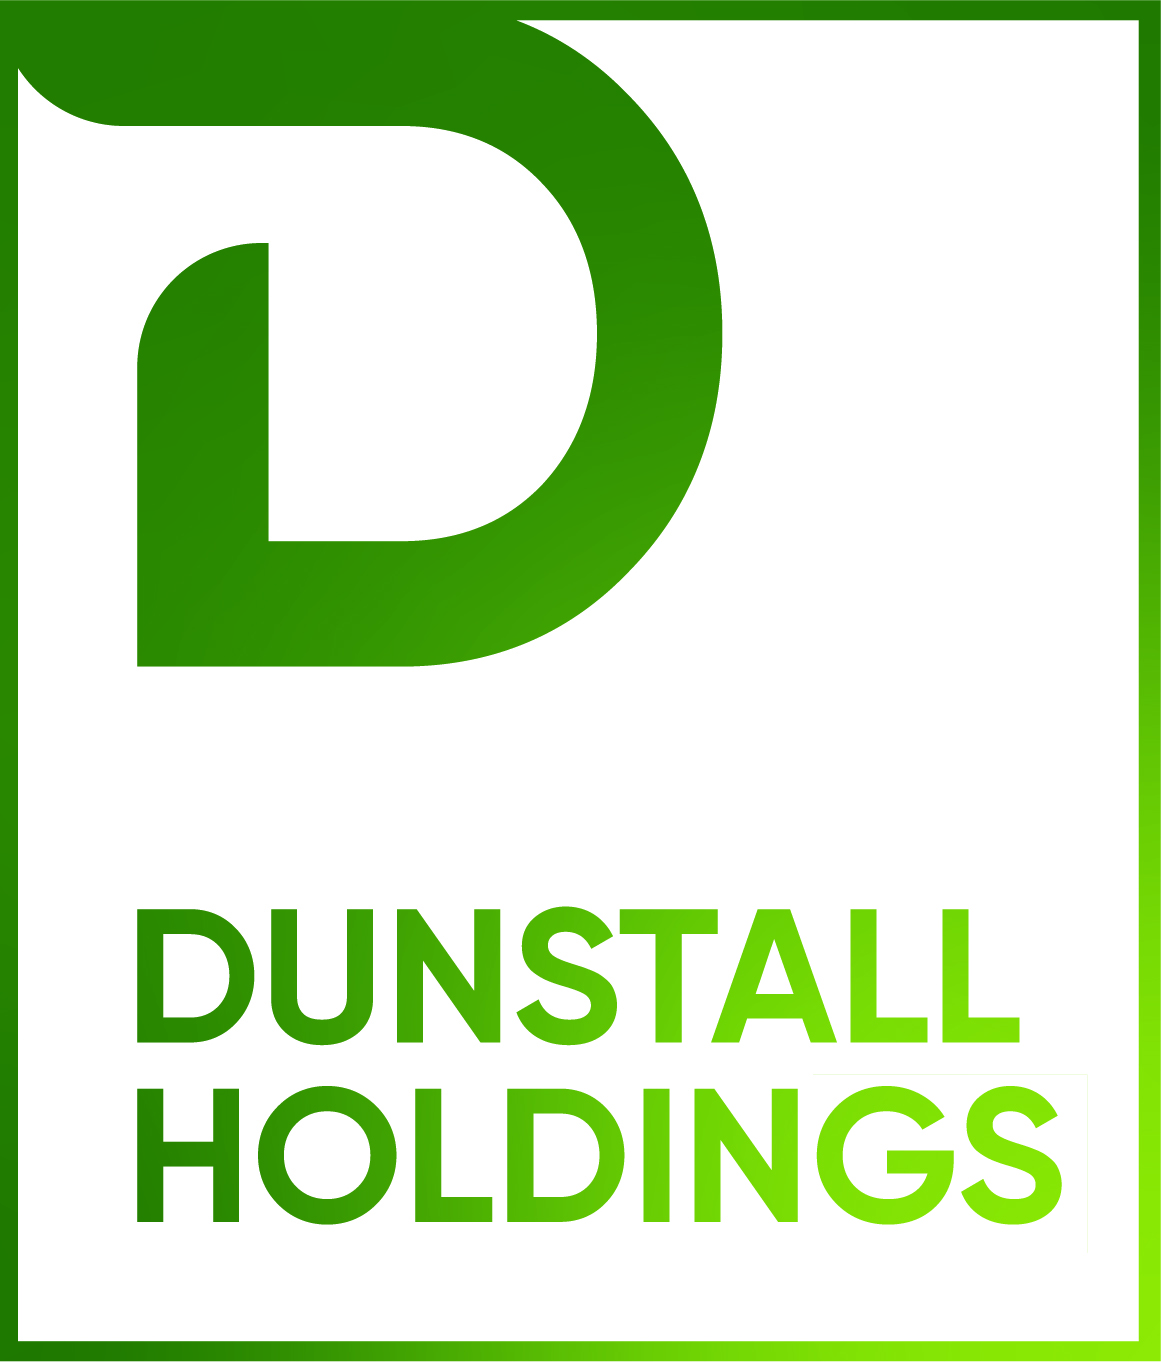 Dunstall Holdings Group